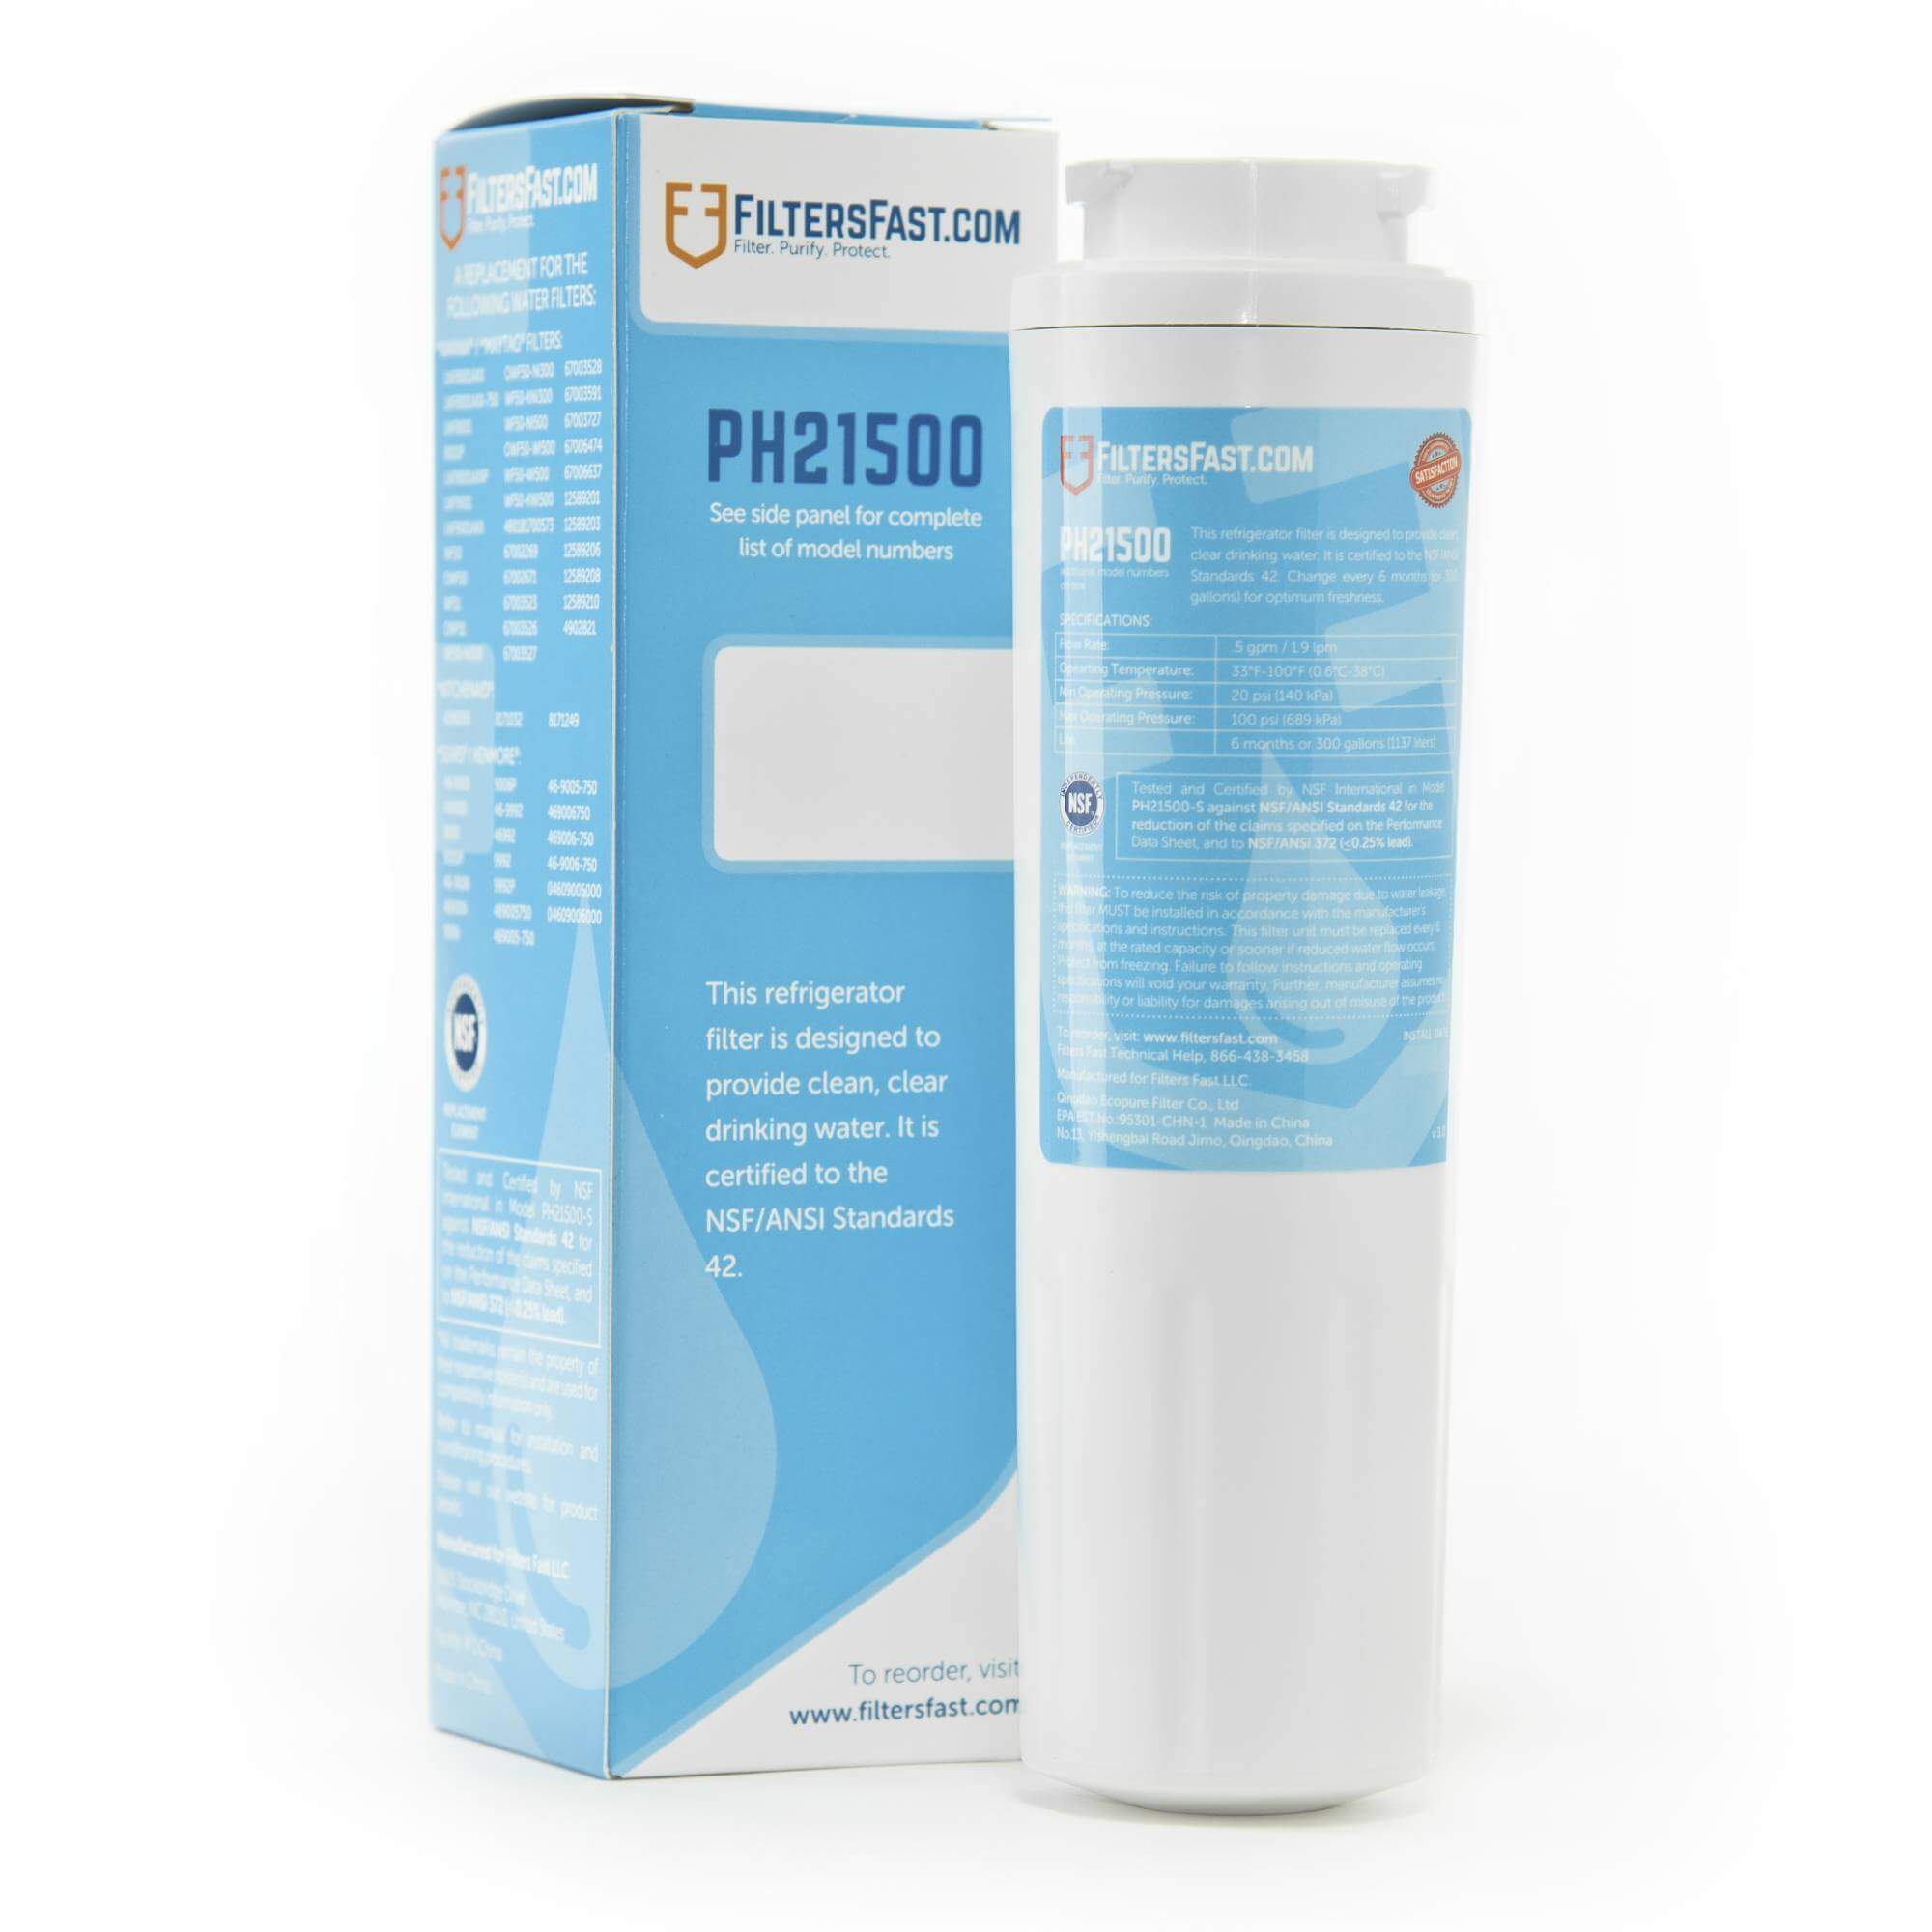 Filters Fast® PH21500 Replacement for Filters Fast&reg FF21500